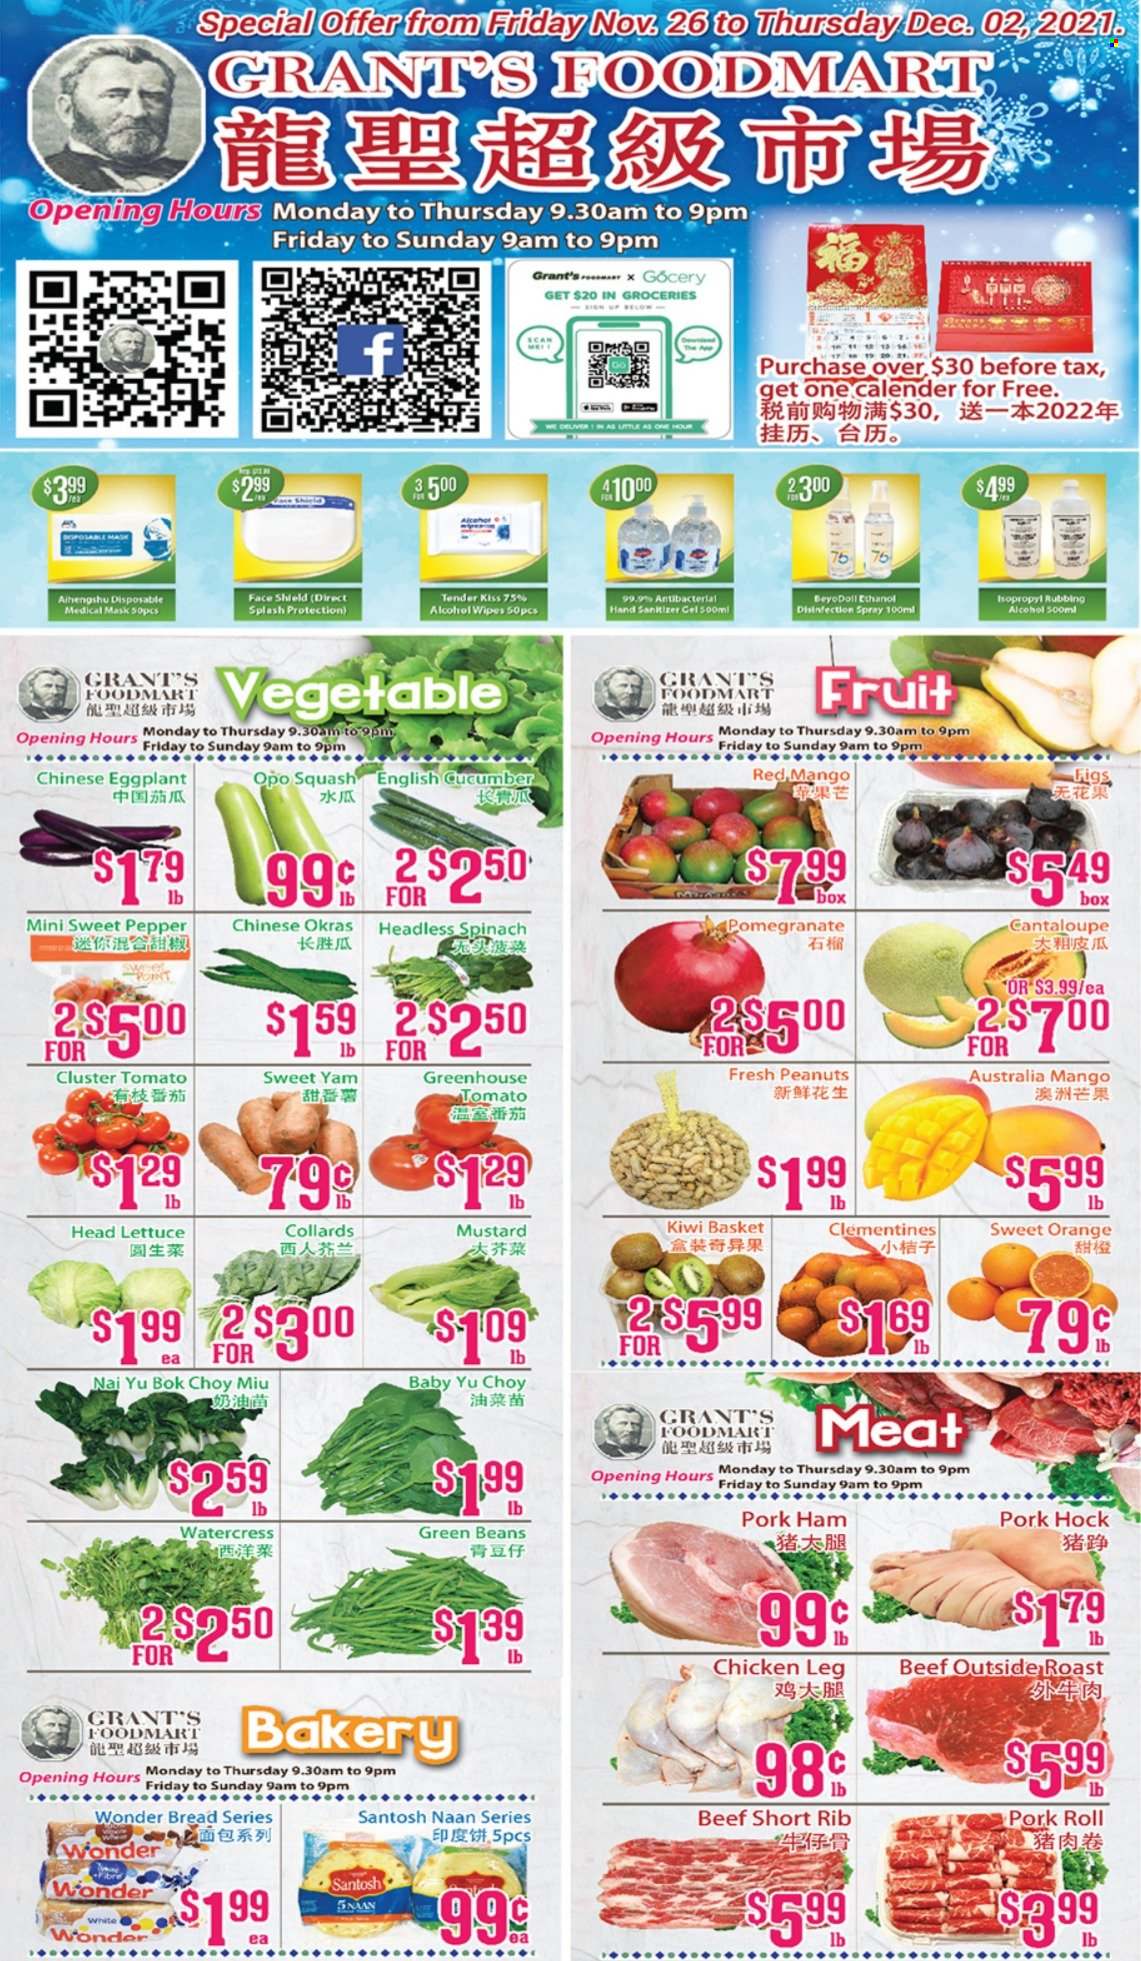 thumbnail - Grant's Foodmart Flyer - November 26, 2021 - December 02, 2021 - Sales products - bread, beans, bok choy, cantaloupe, green beans, spinach, lettuce, eggplant, clementines, figs, mango, pomegranate, ham, watercress, pepper, mustard, peanuts, Grant's, chicken legs, pork hock, pork meat, wipes, hand sanitizer, kiwi, oranges. Page 1.